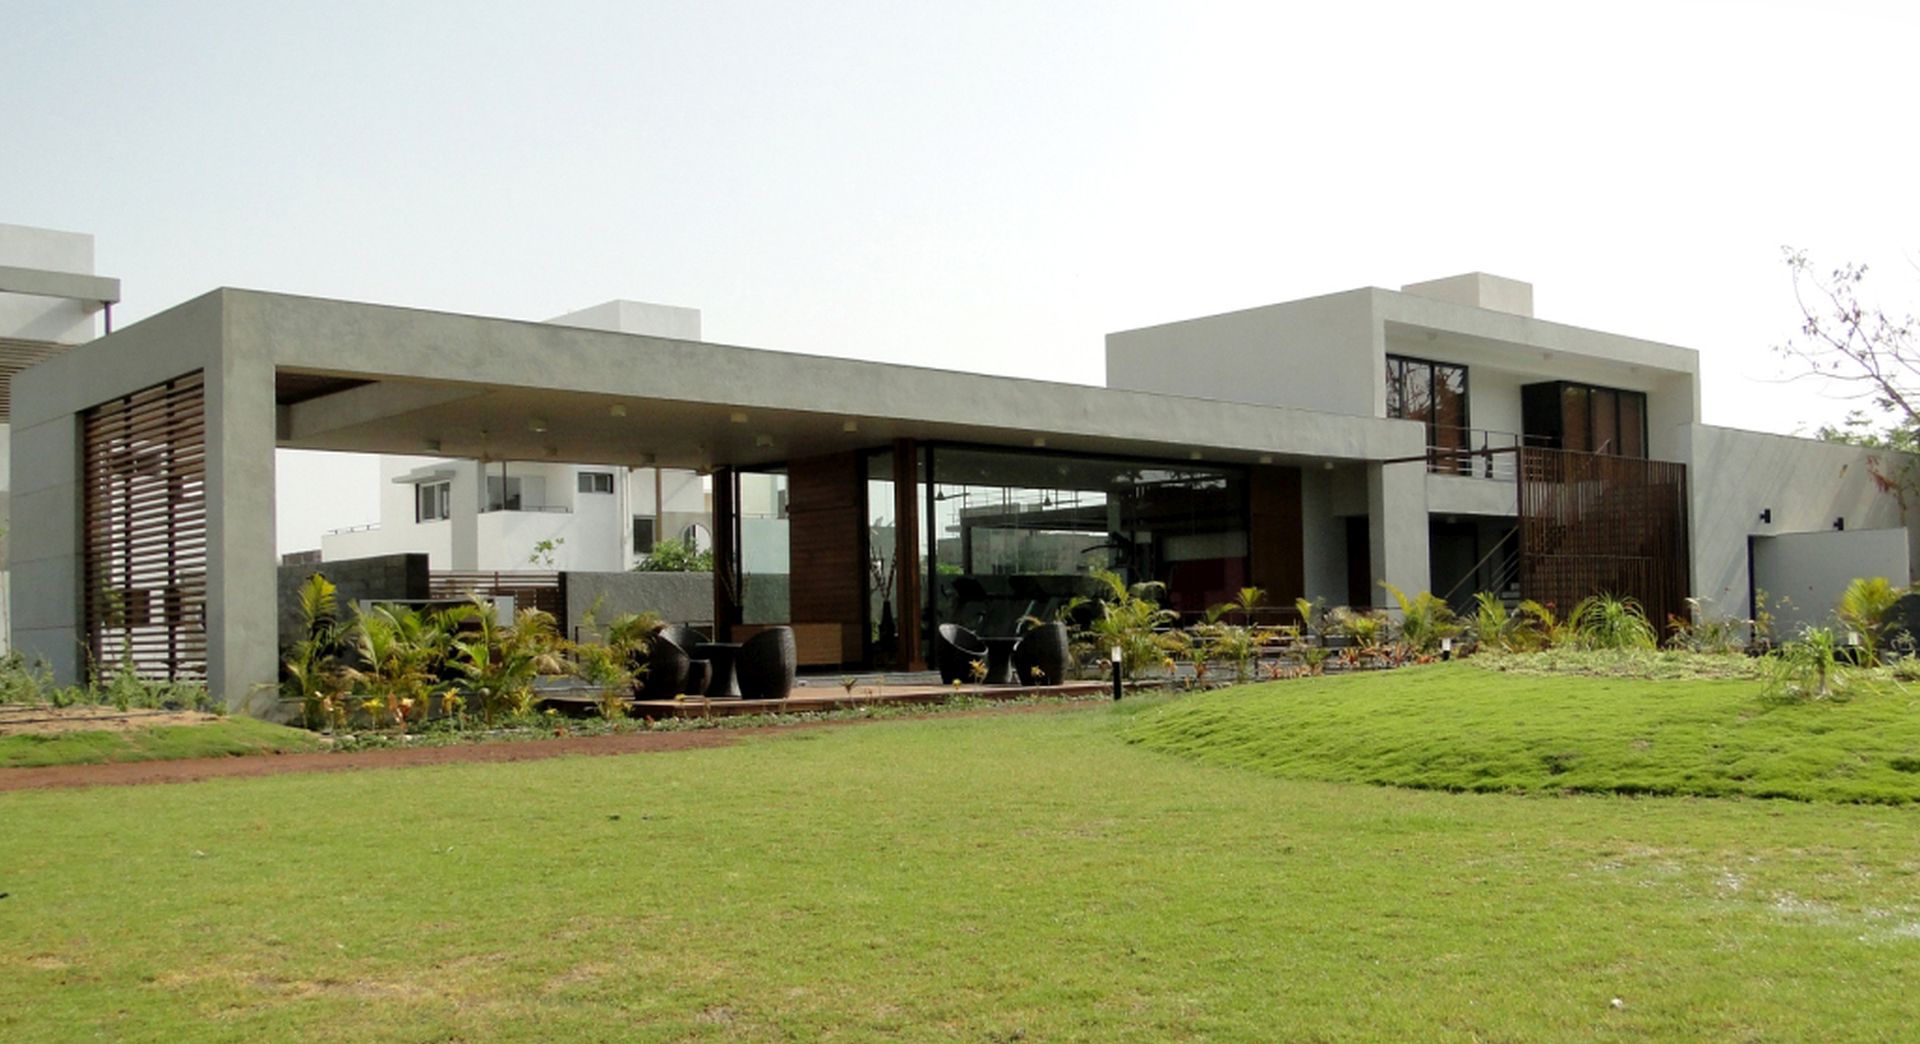 Serendeep Clubhouse at Ahmadabad by Modo Designs